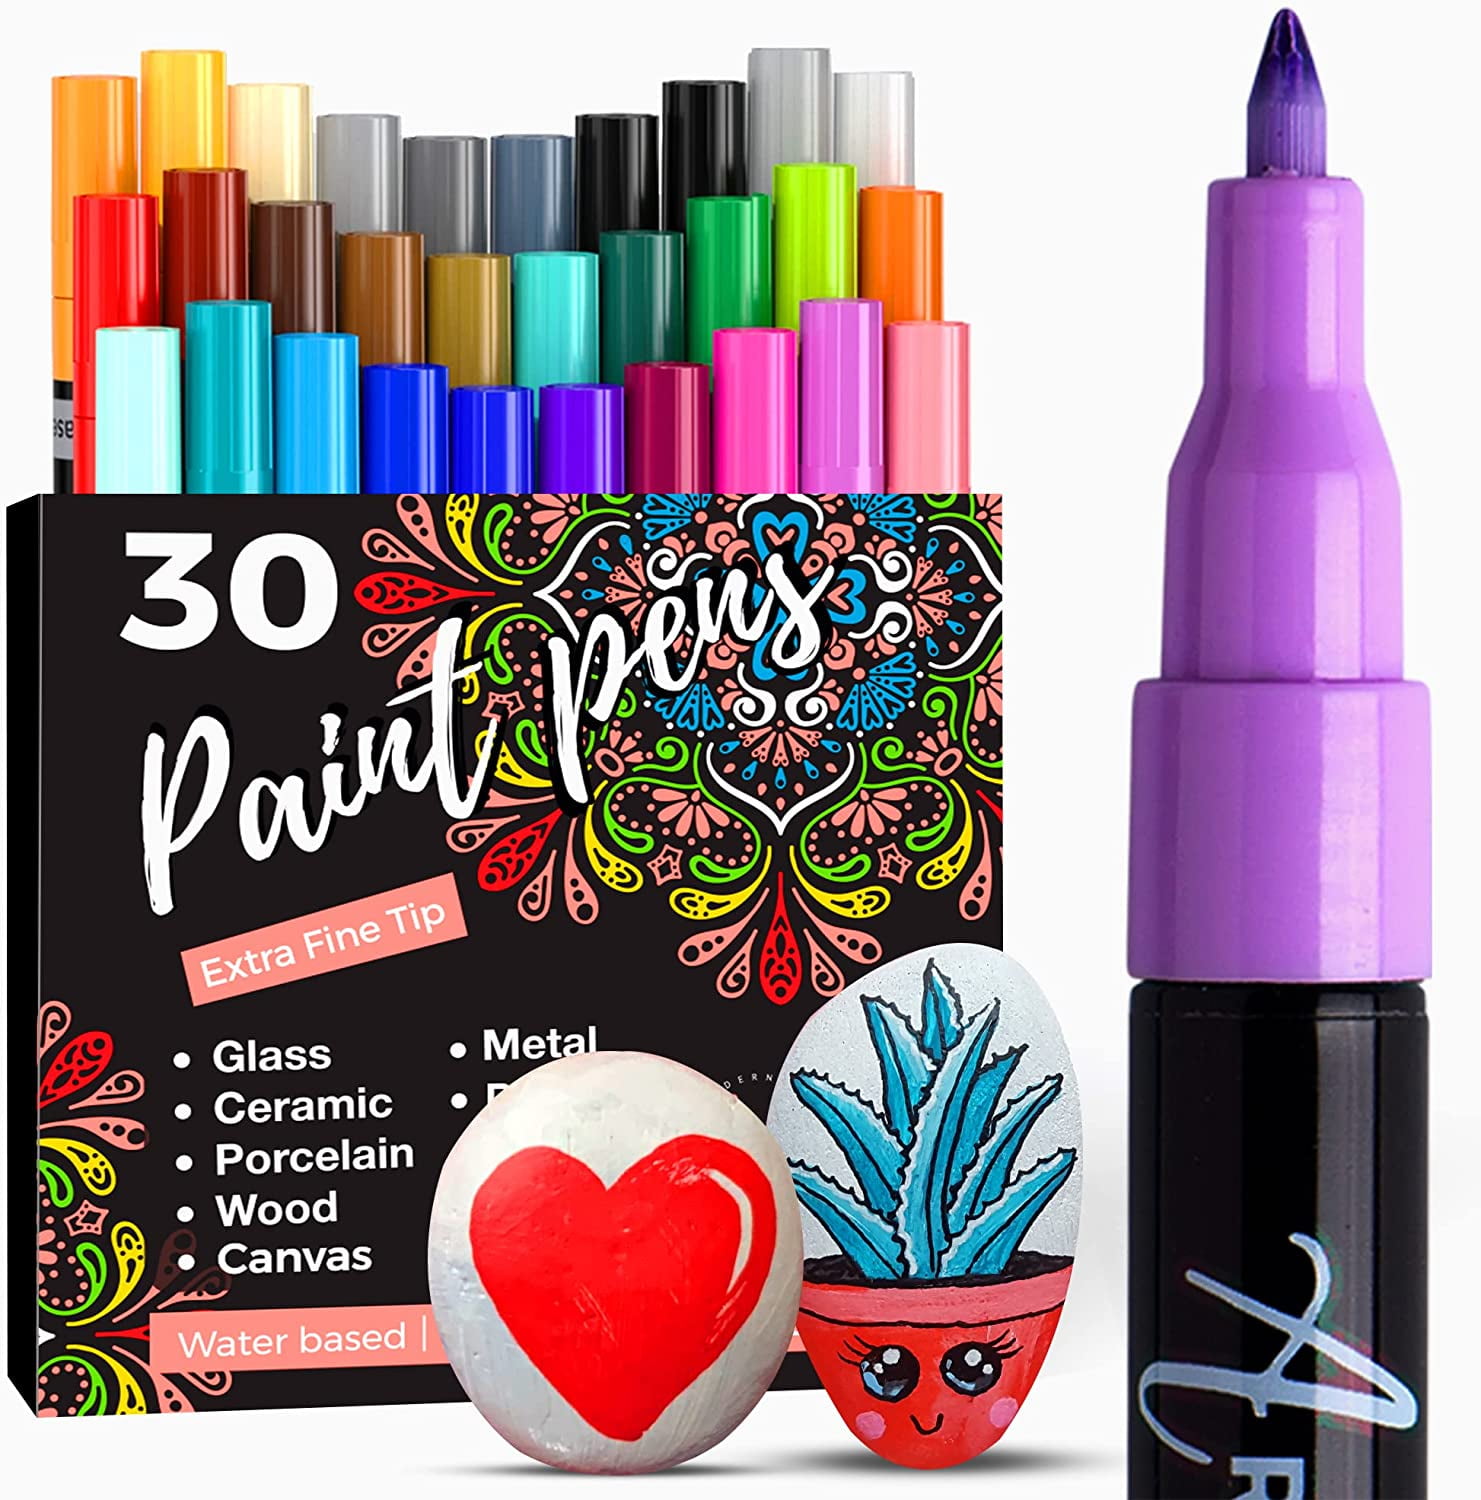 Primrosia 30 Pastel Acrylic Paint Pens – Extra Fine Tip Marker Set. Art  supplies for Bullet Journals, Planners, Drawing, Scrapbooking, Coloring